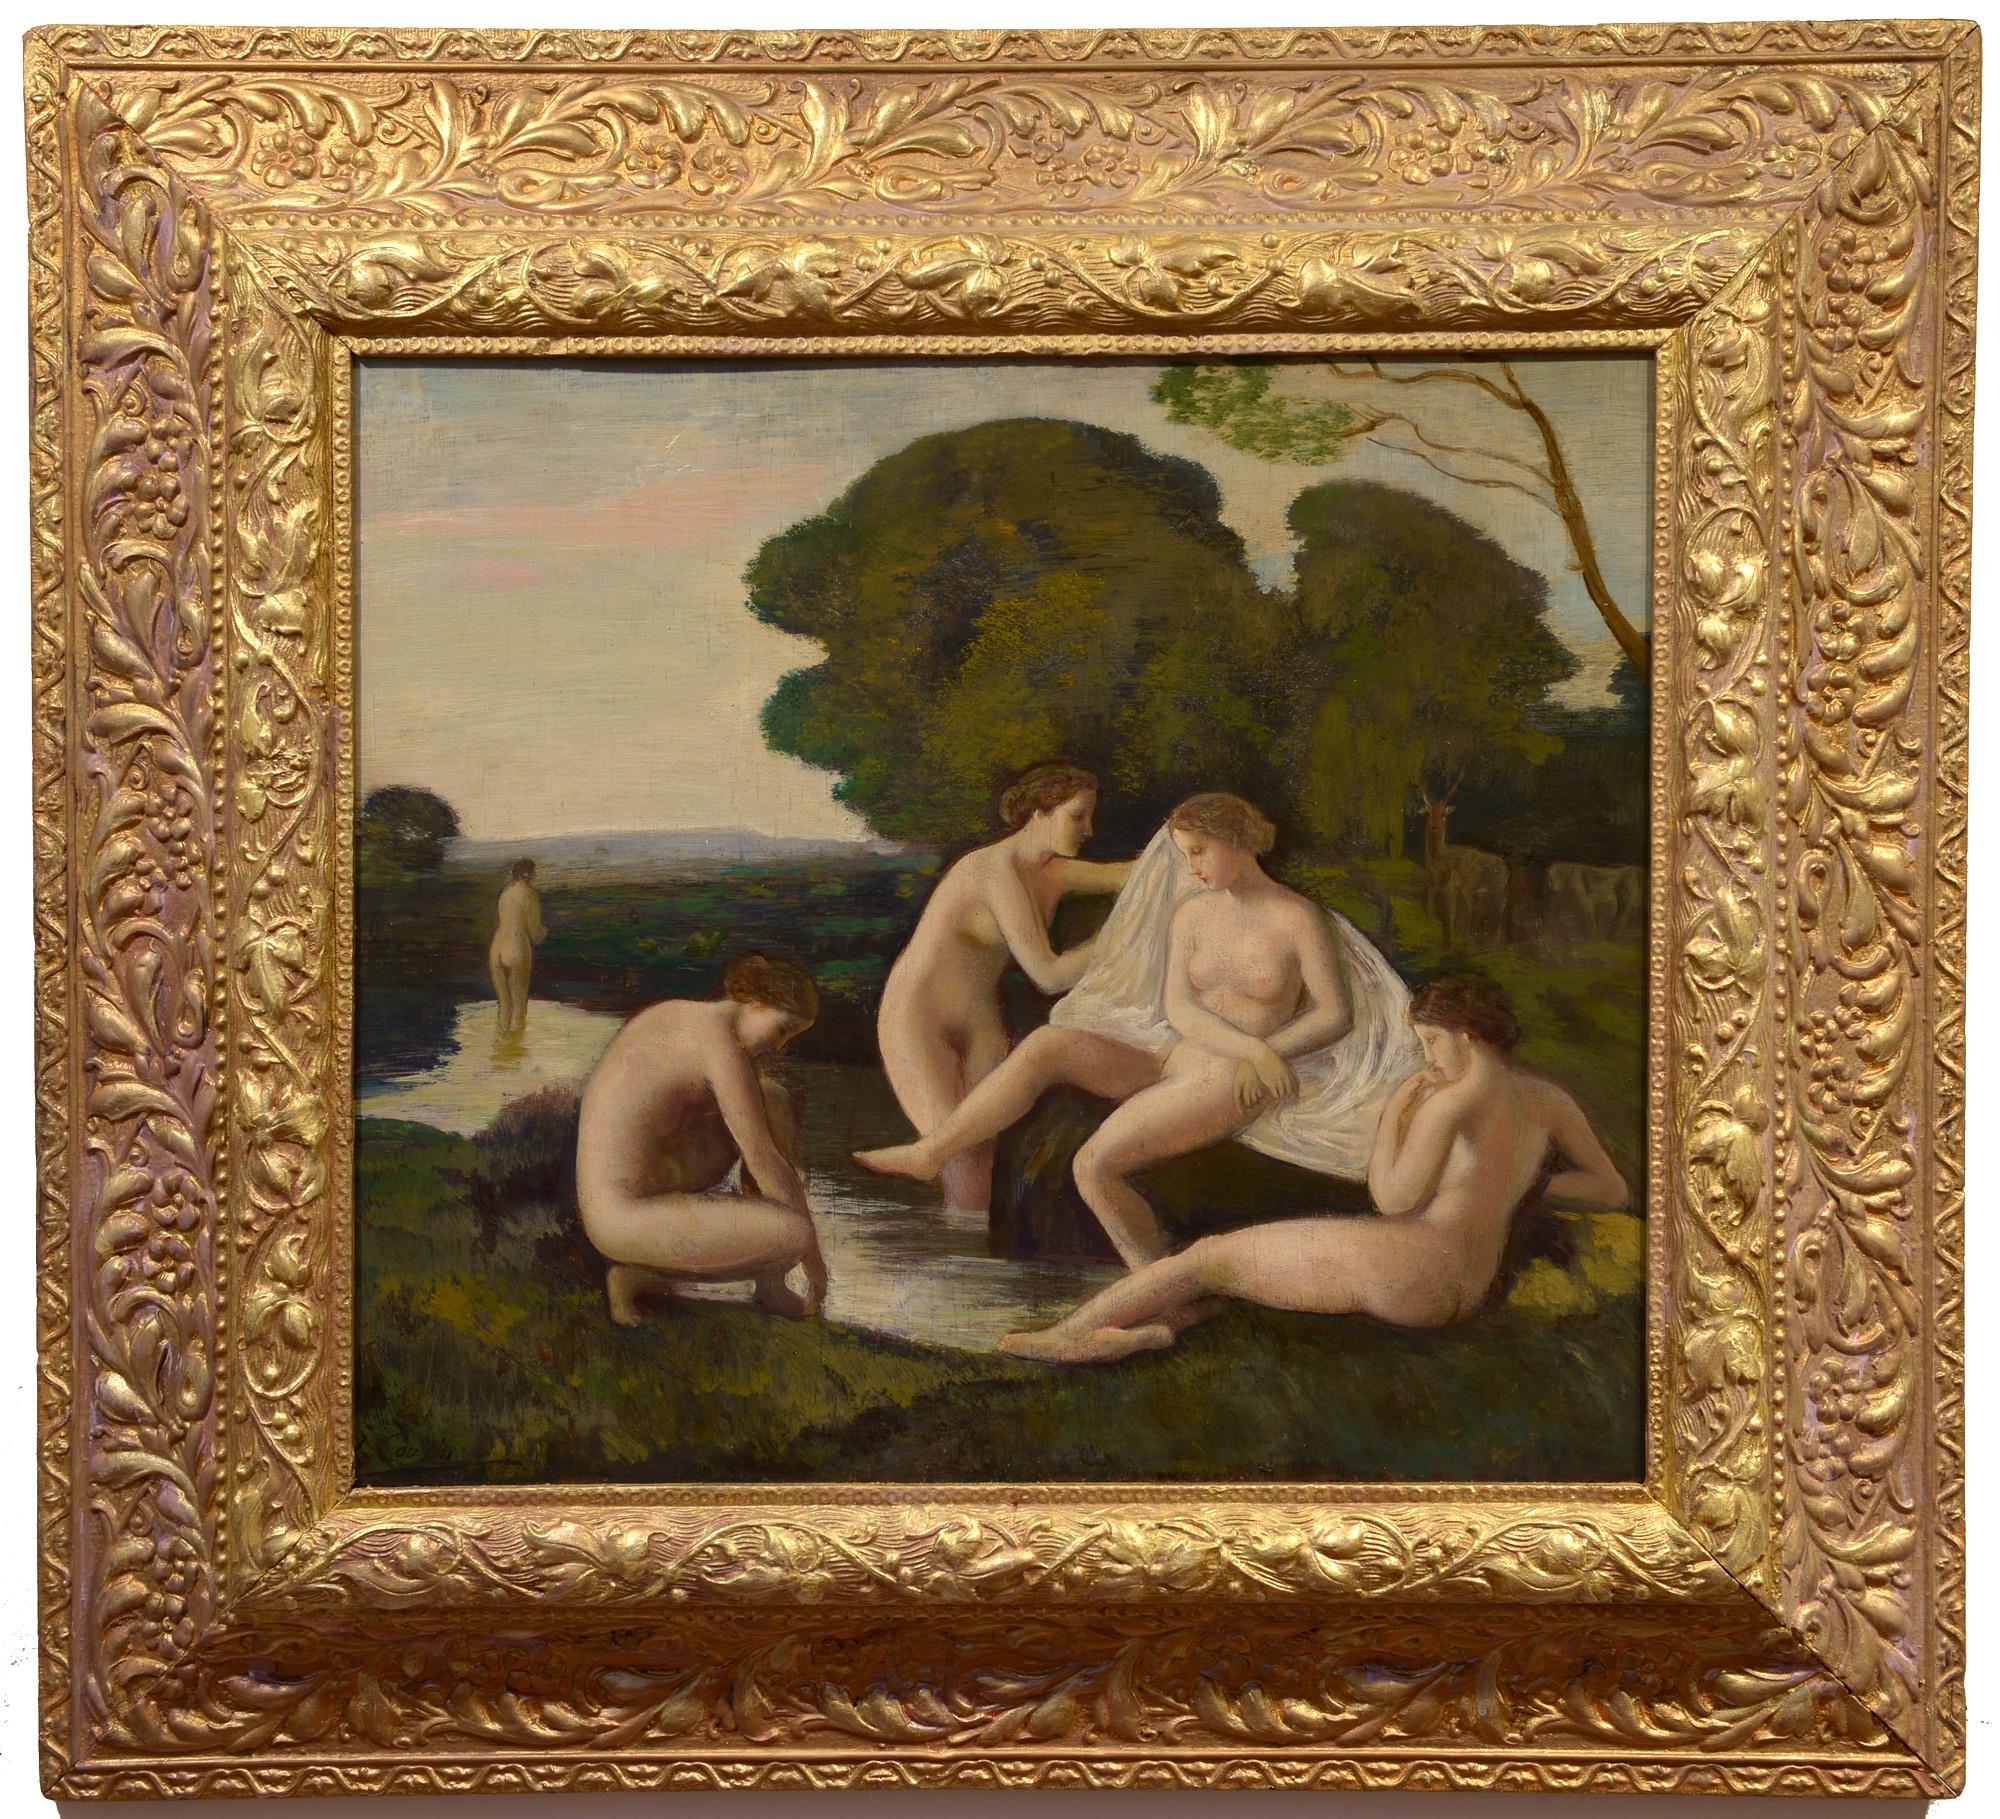 Arcadian Landscape, Nude, Figurative, Impressionist - Painting by Victor Gustave Cousin